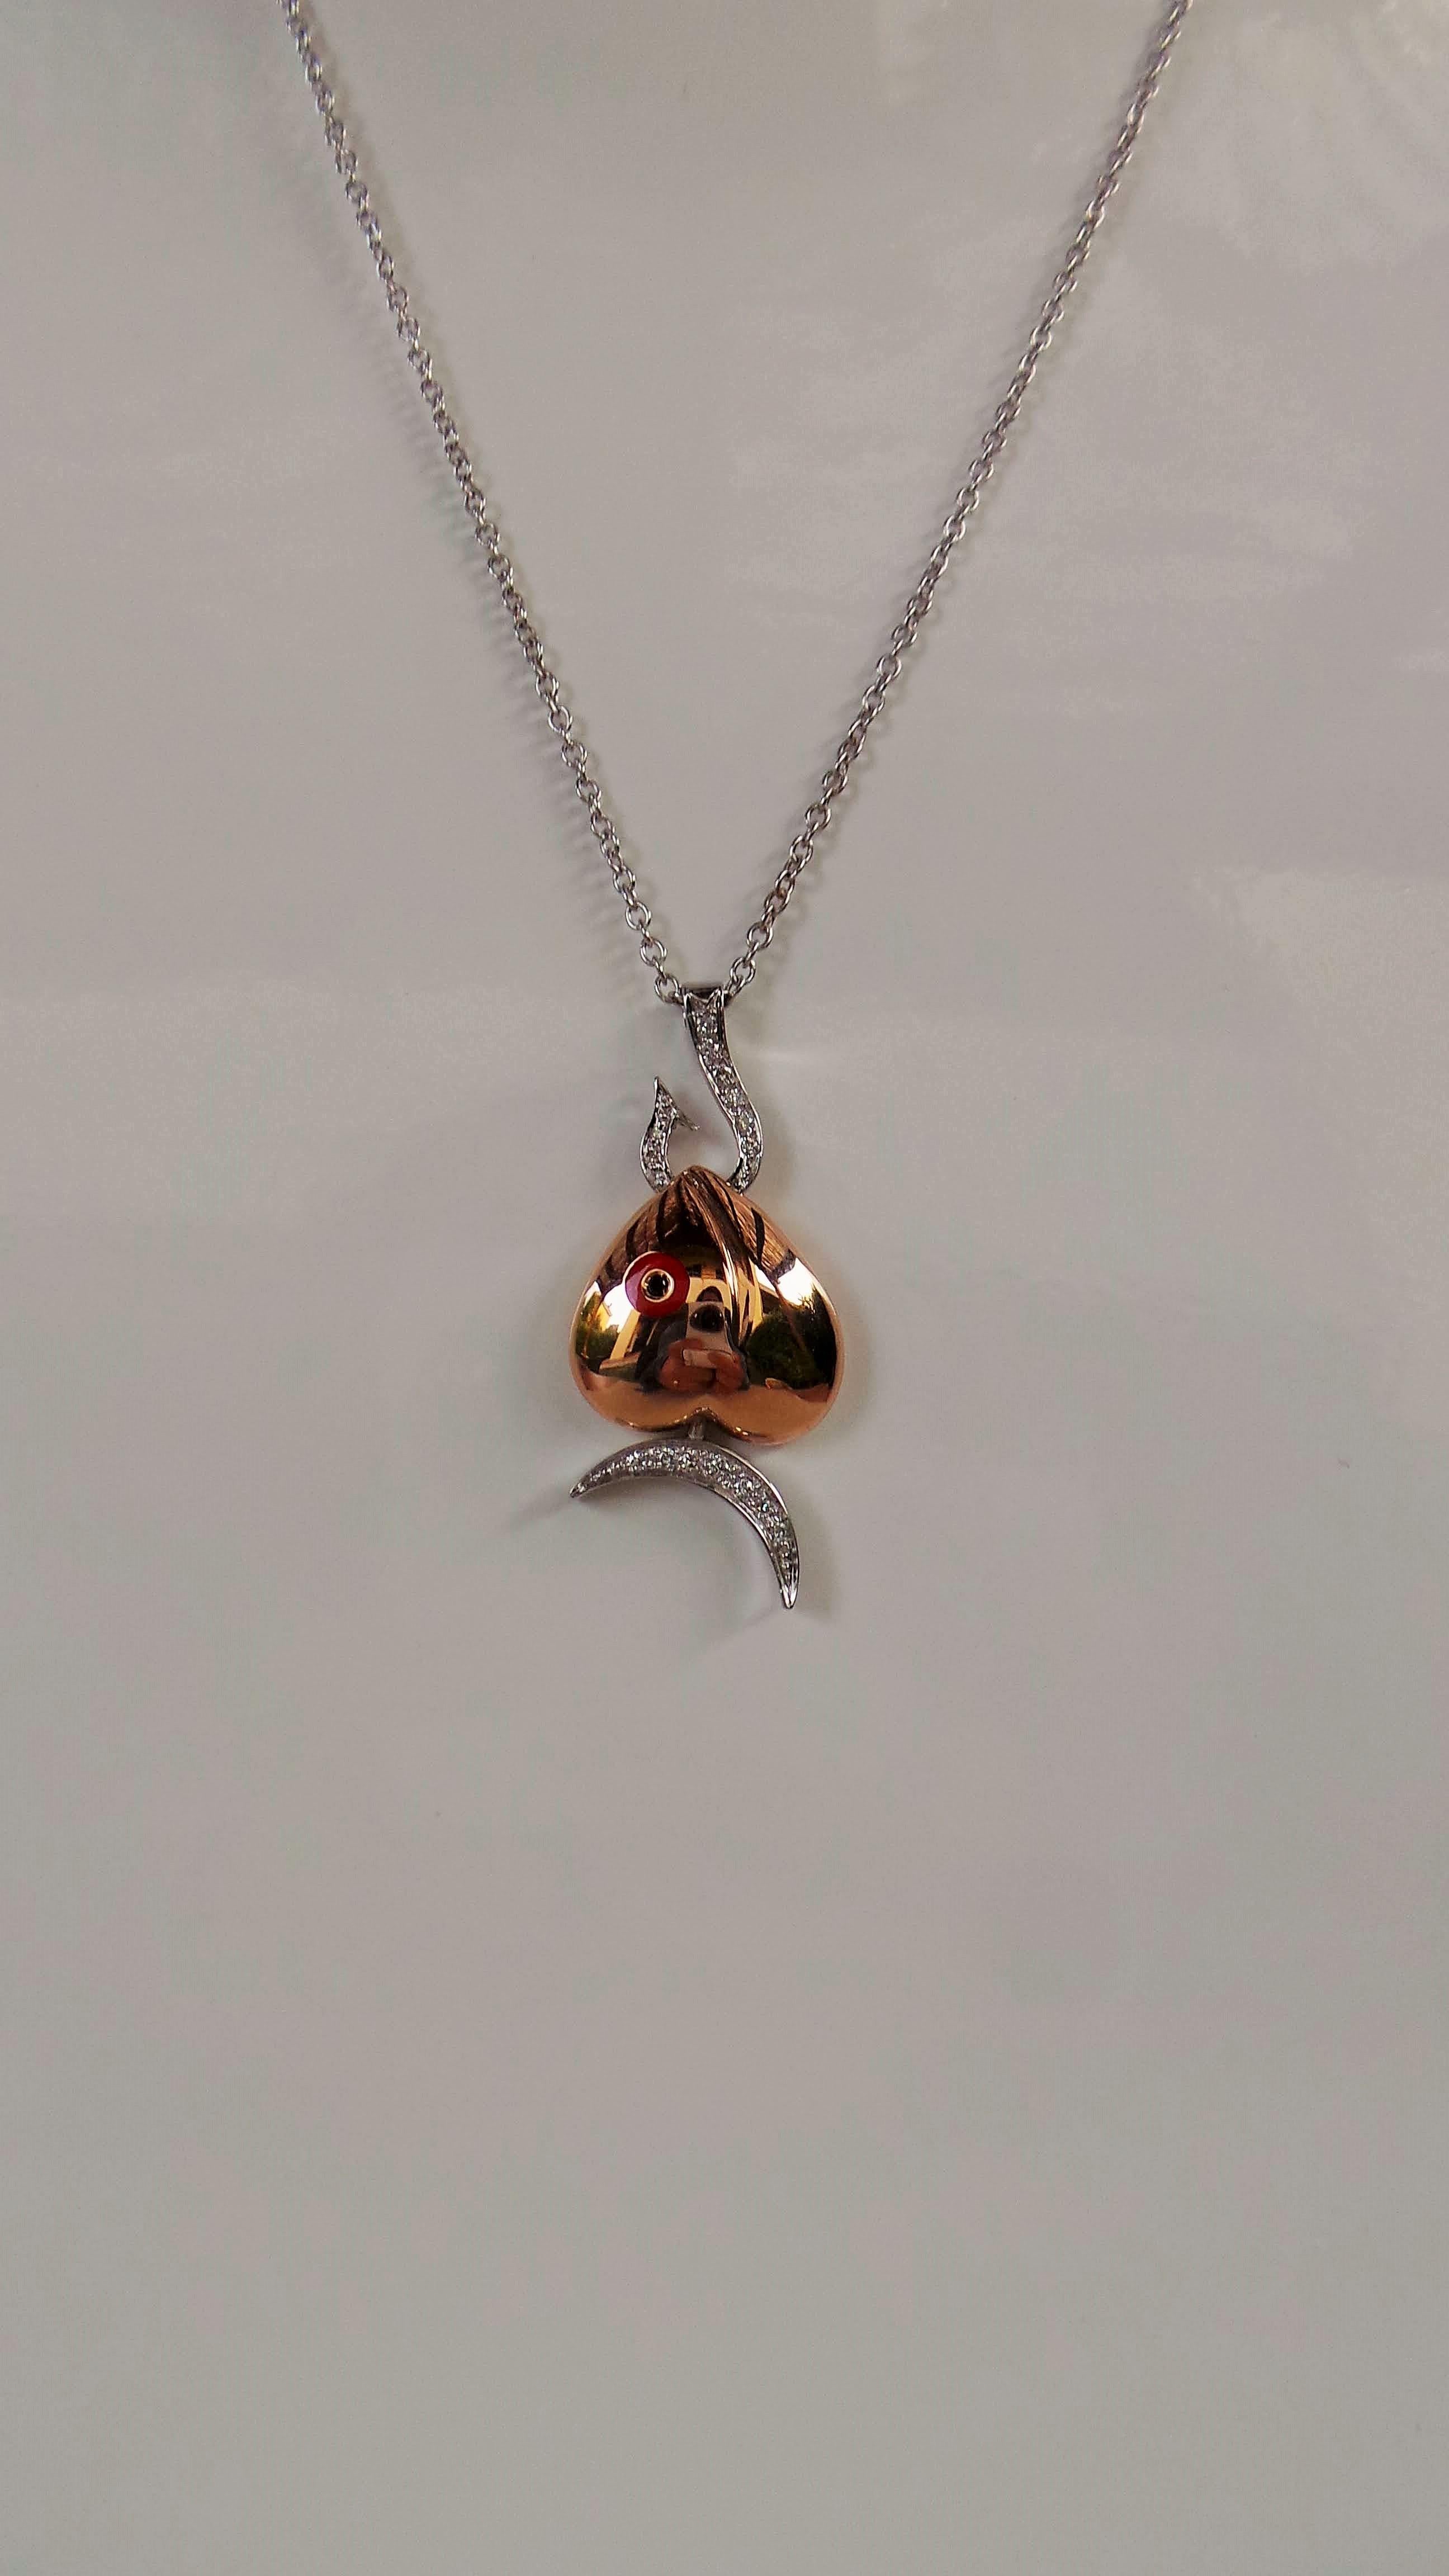 Andrea Macinai created this enamelled design for pendant and hand-set stones with white and black diamonds cut brillant.
This enchanting pendant necklace is entirely handmade in white and rose gold. Black diamond 0.015 carat in the eye of the fish,